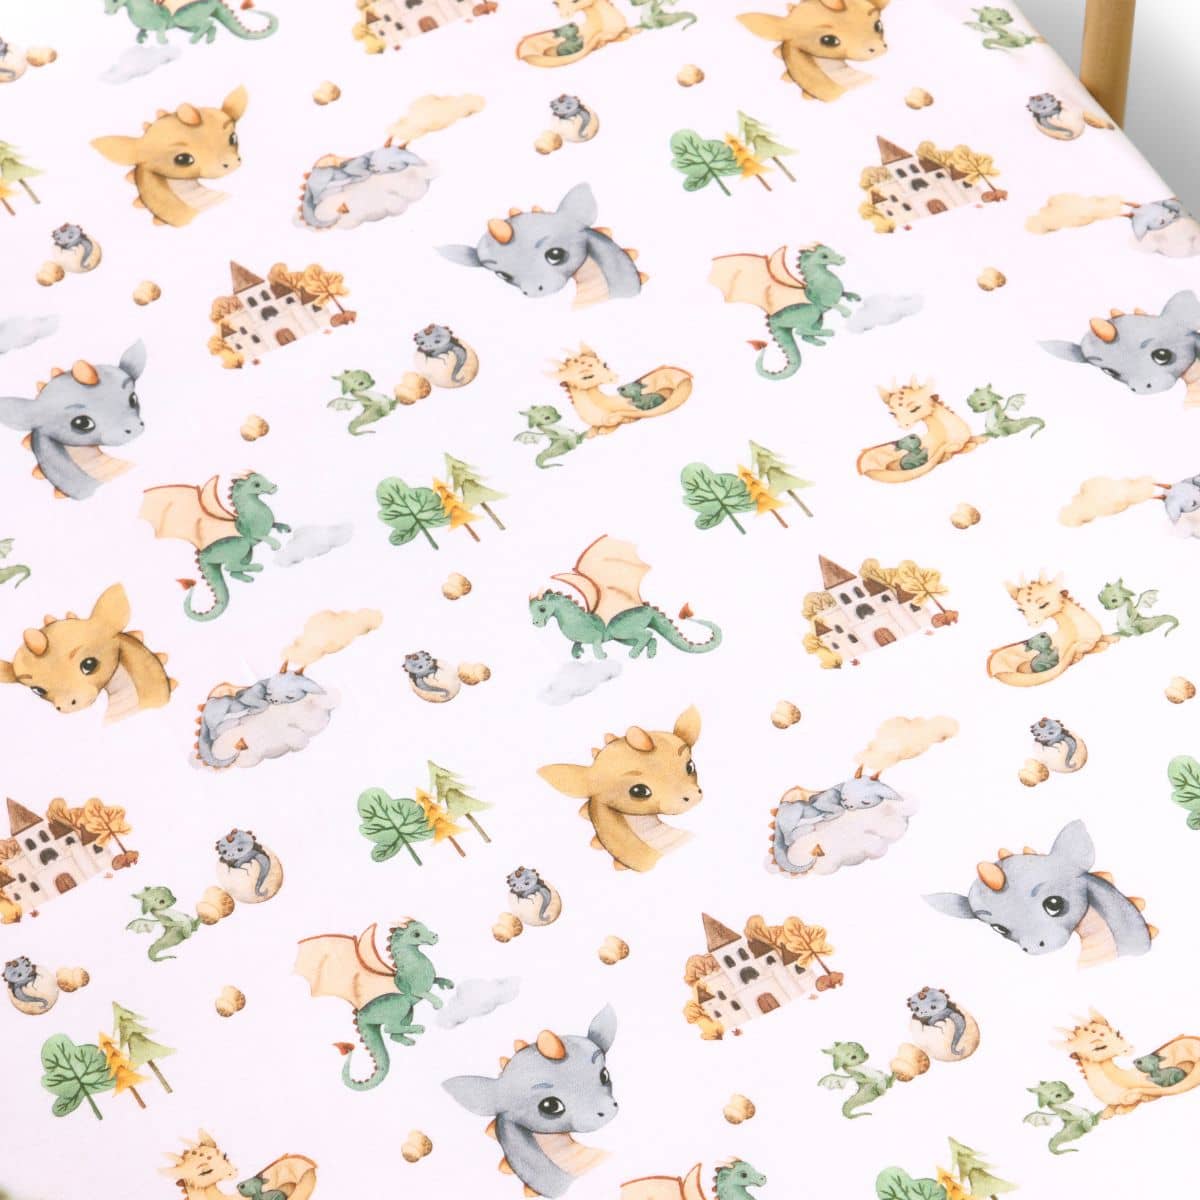 Snuggle Hunny Fitted Cot Sheet - Dragon Organic